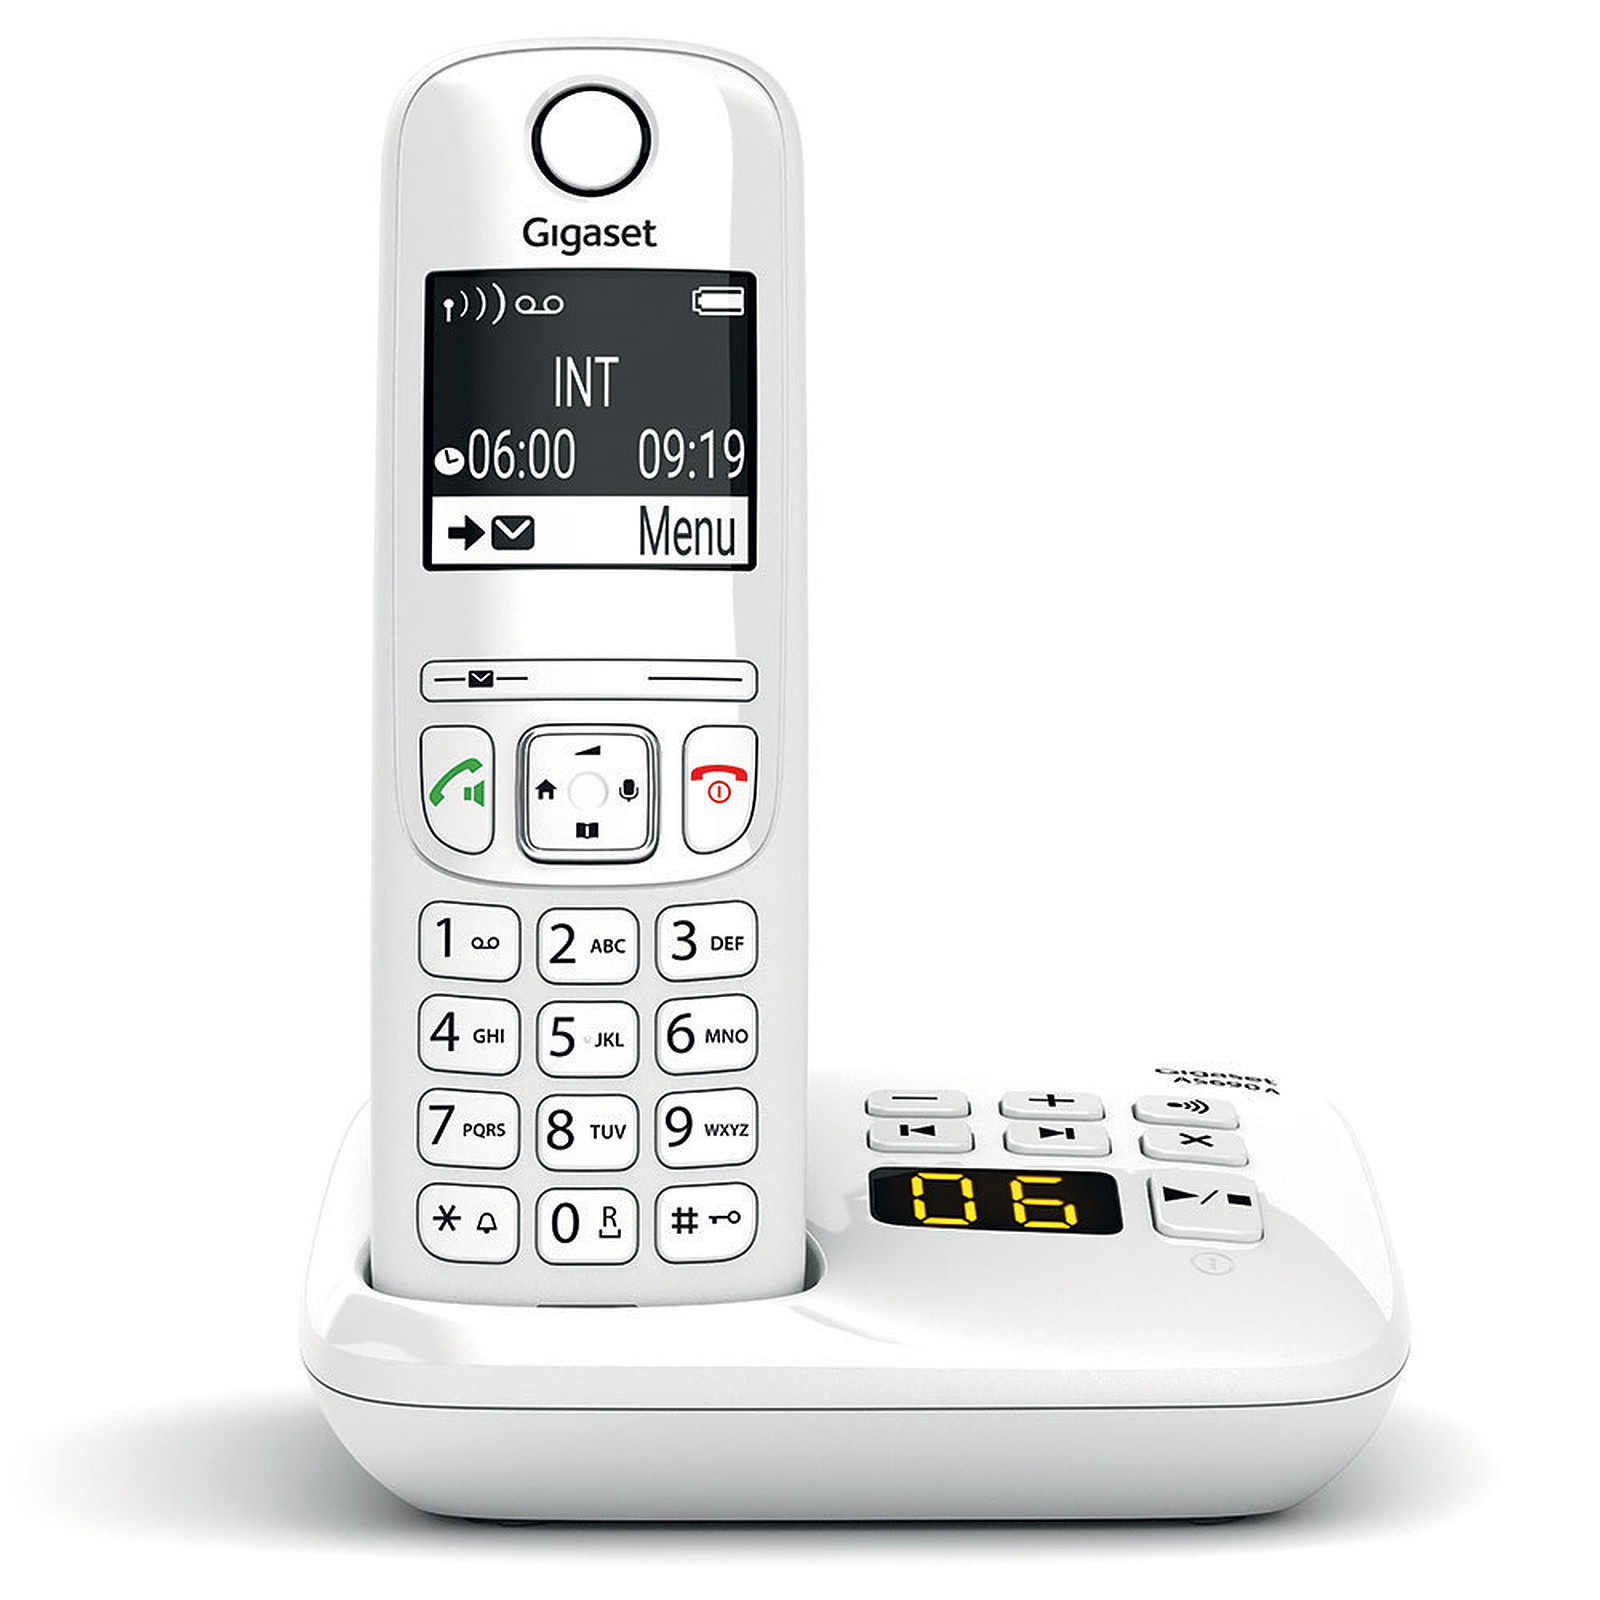 Gigaset AS690A Blanc · Occasion - Telephone sans fil Gigaset - Occasion